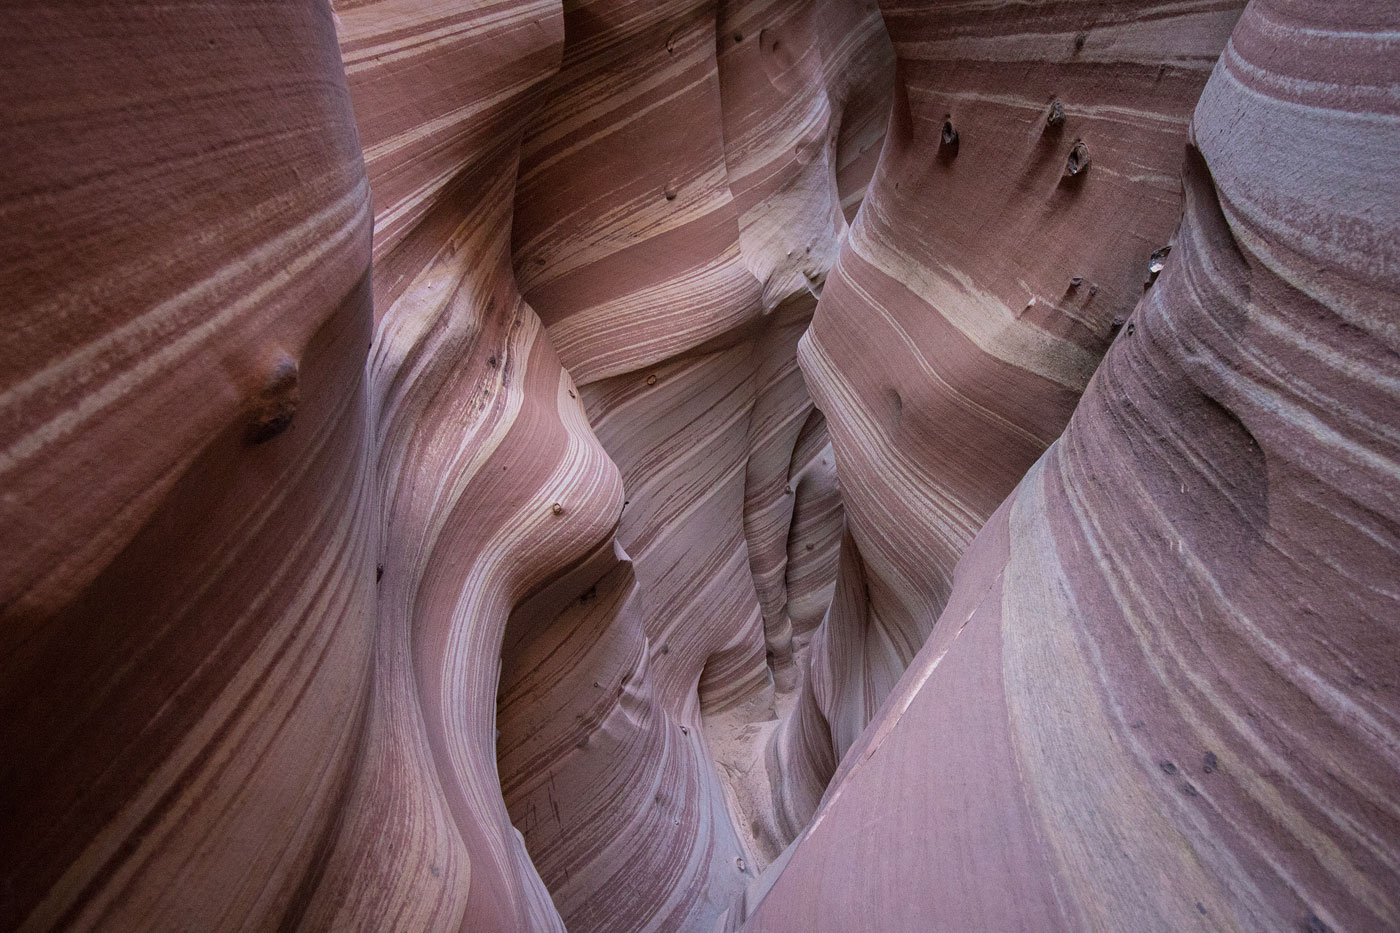 Hike Zebra and Tunnel Slot Canyons in Grand Staircase - Escalante National Monument, Utah - Stav is Lost